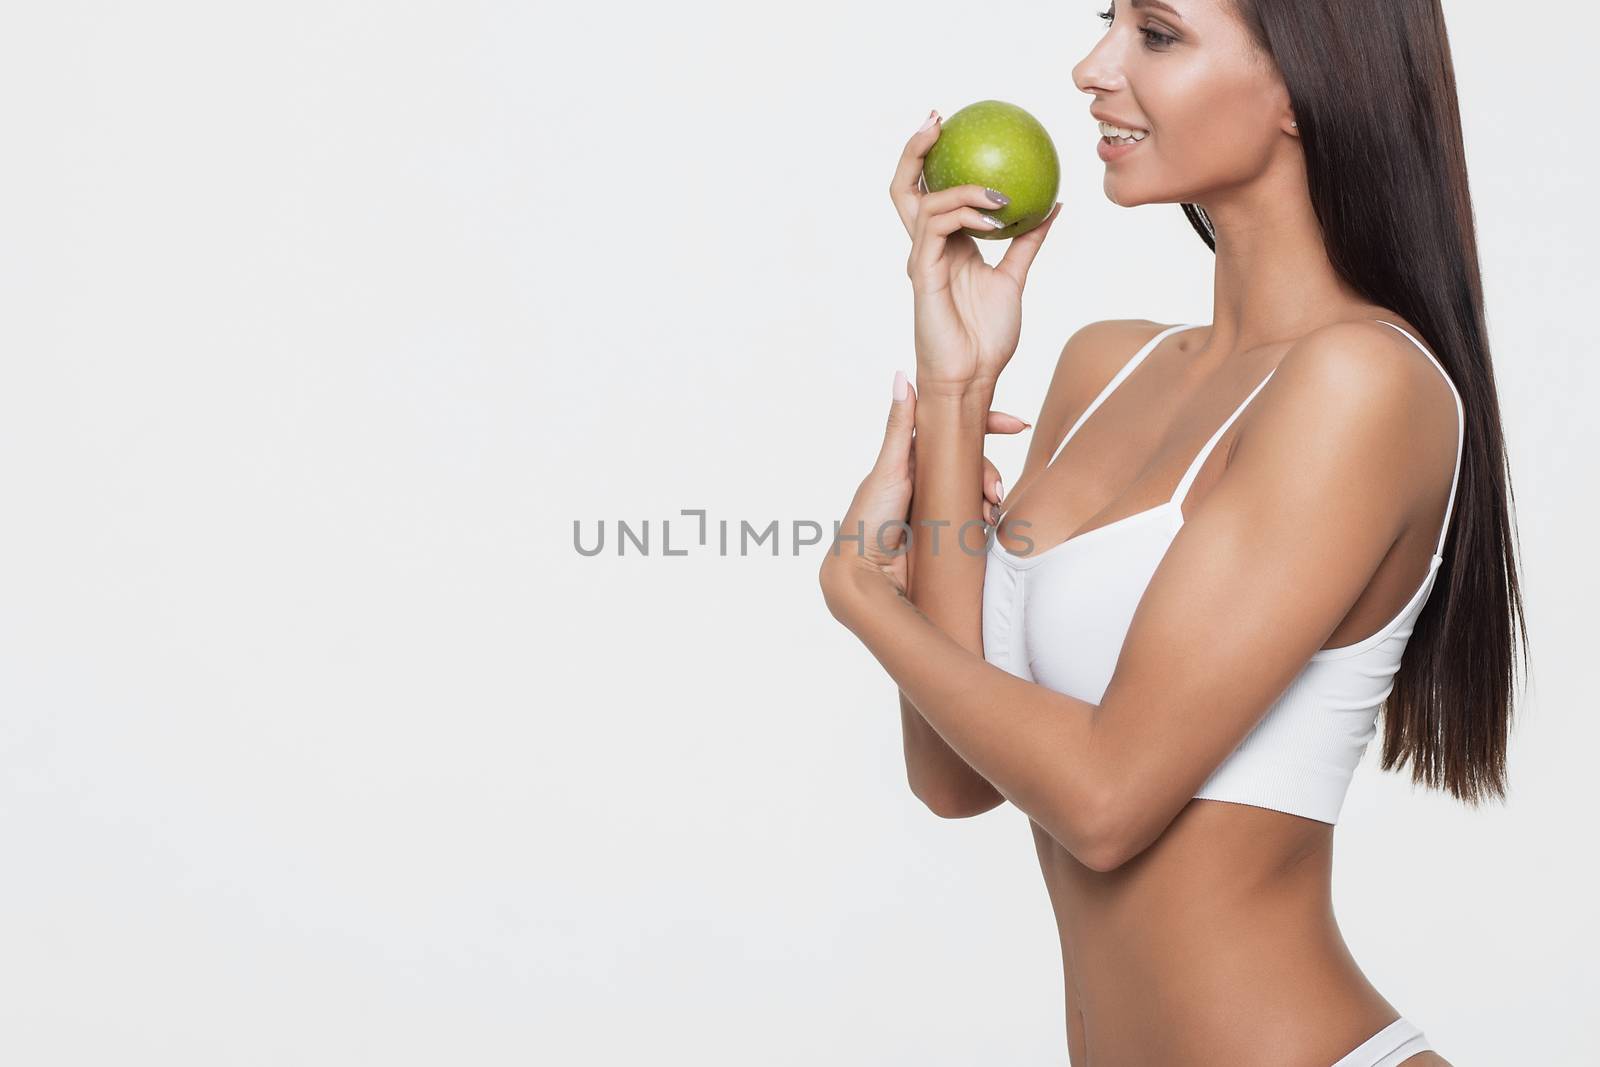 Attractive smiling woman portrait on white background with apple.